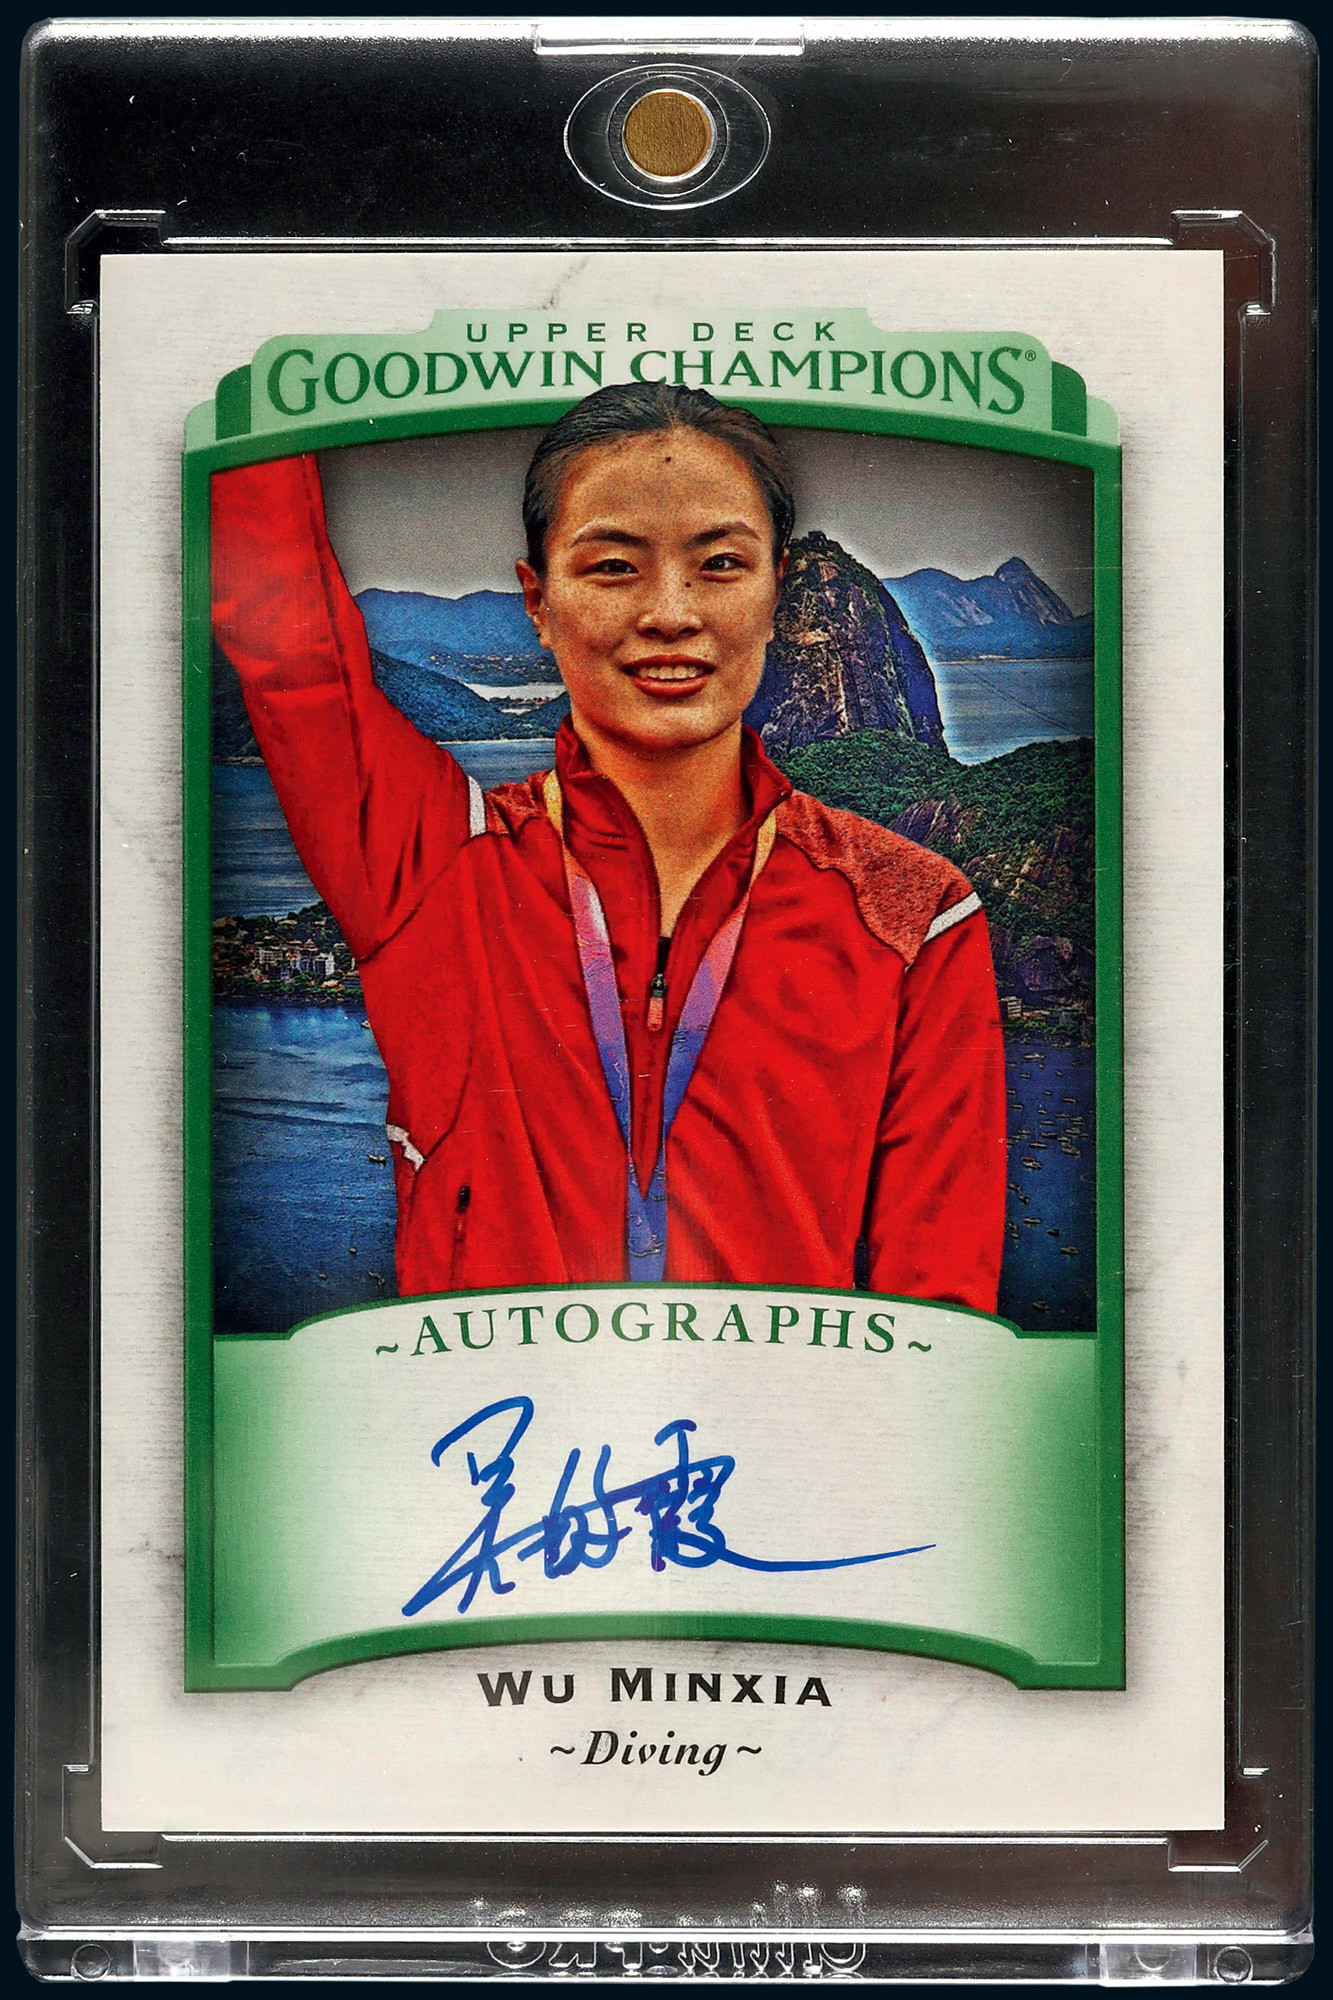 The autographed star card signed by Wu Minxia, the “Queen of Diving”